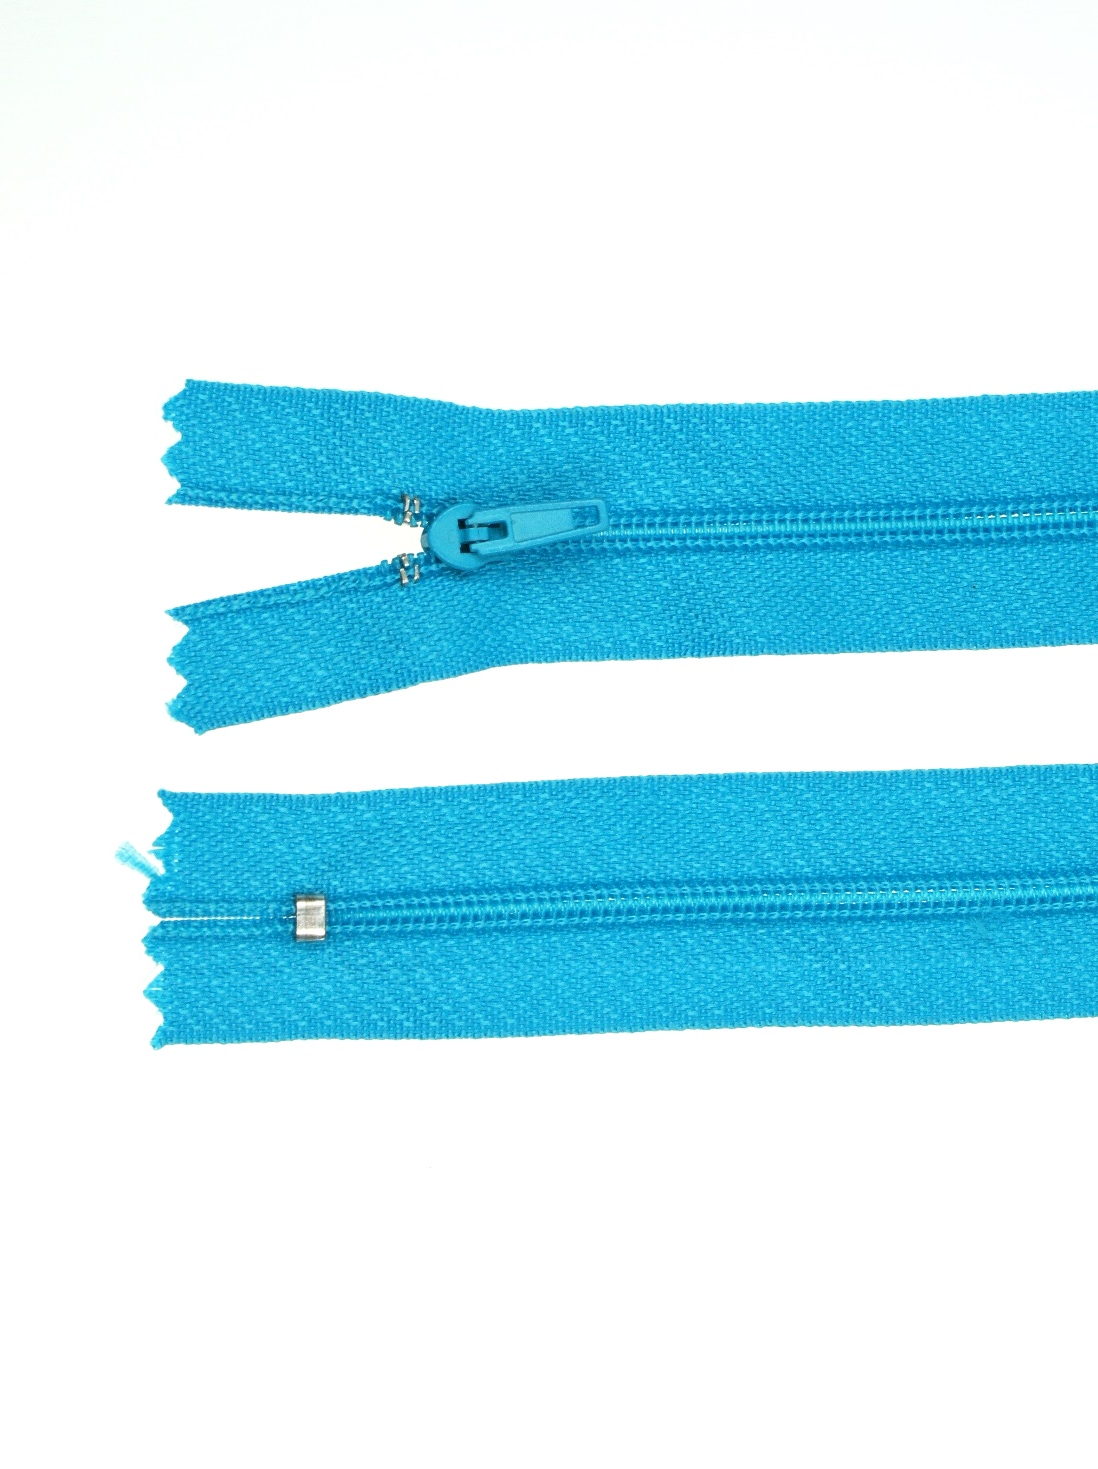 Picture of 25 zippers 3mm - 18cm long - color: turquoise